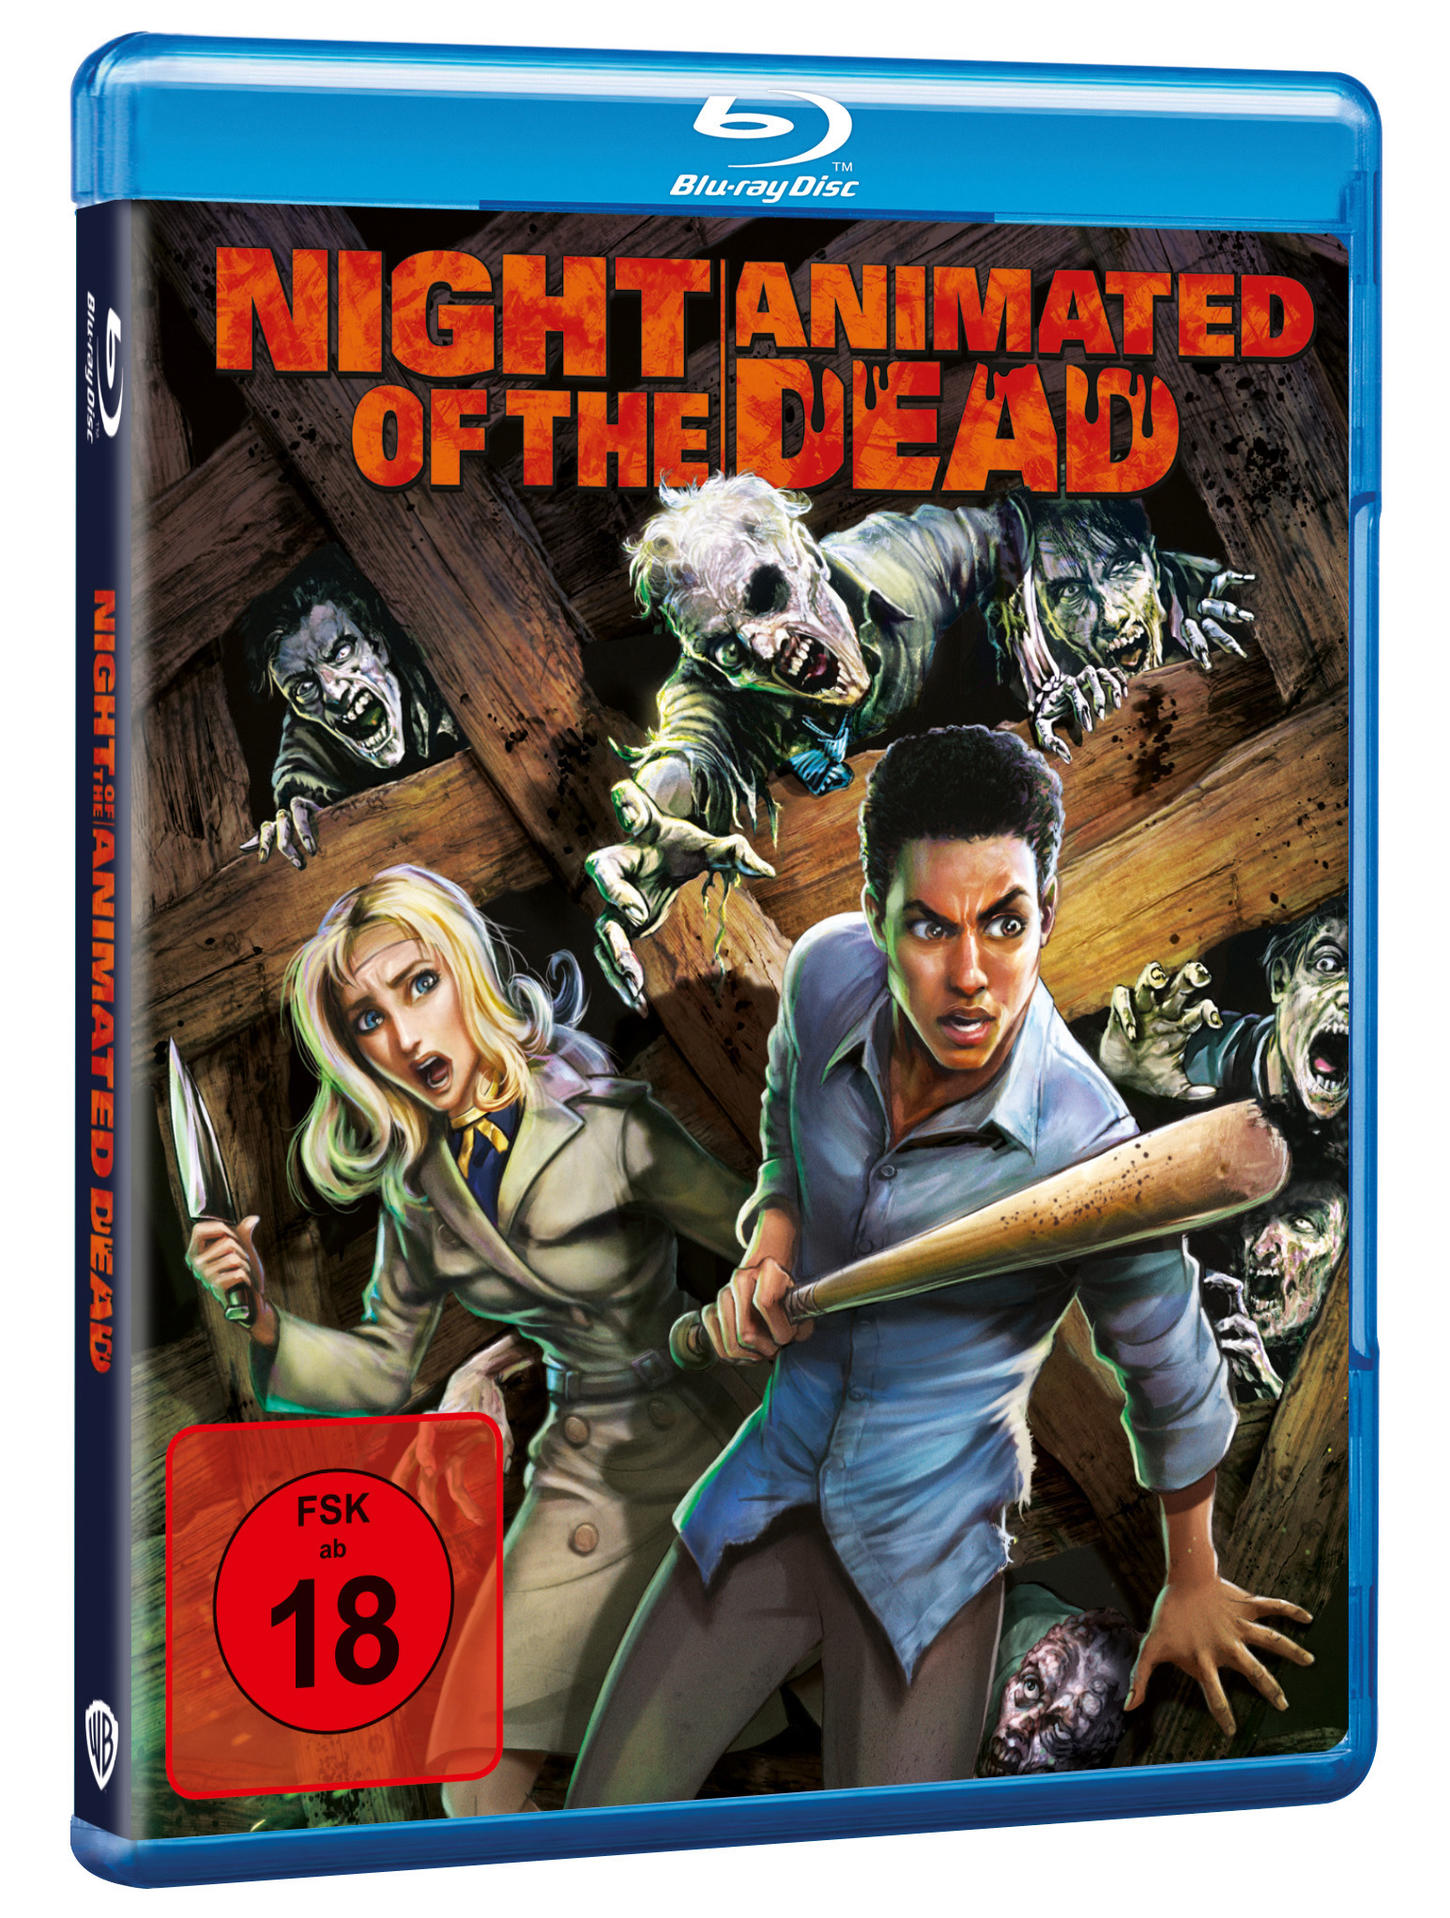 Blu-ray Dead Animated the Night of